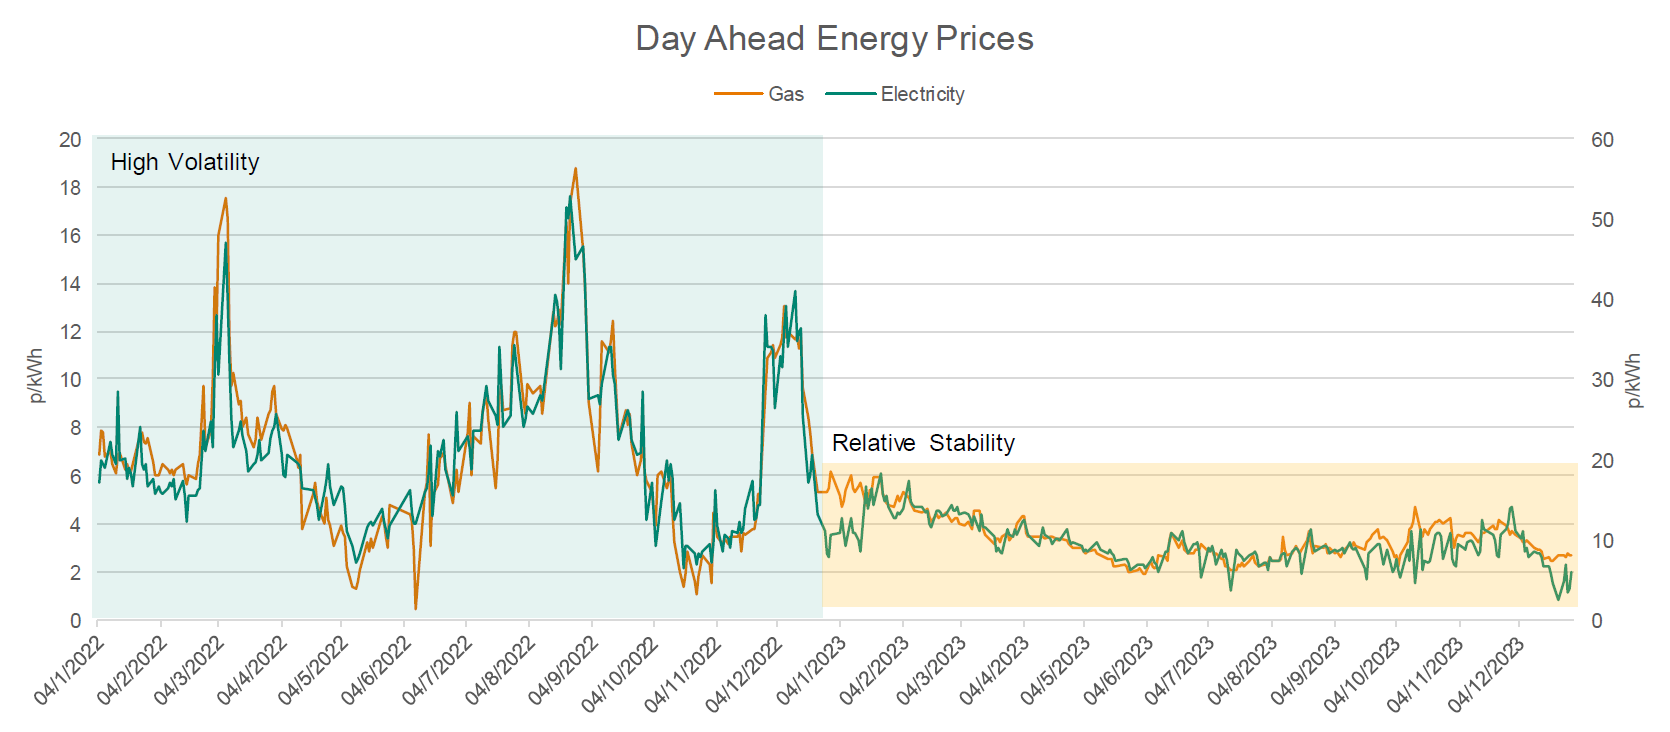 Comparing Day Ahead Energy Price Volatility in 2022 vs. 2023 